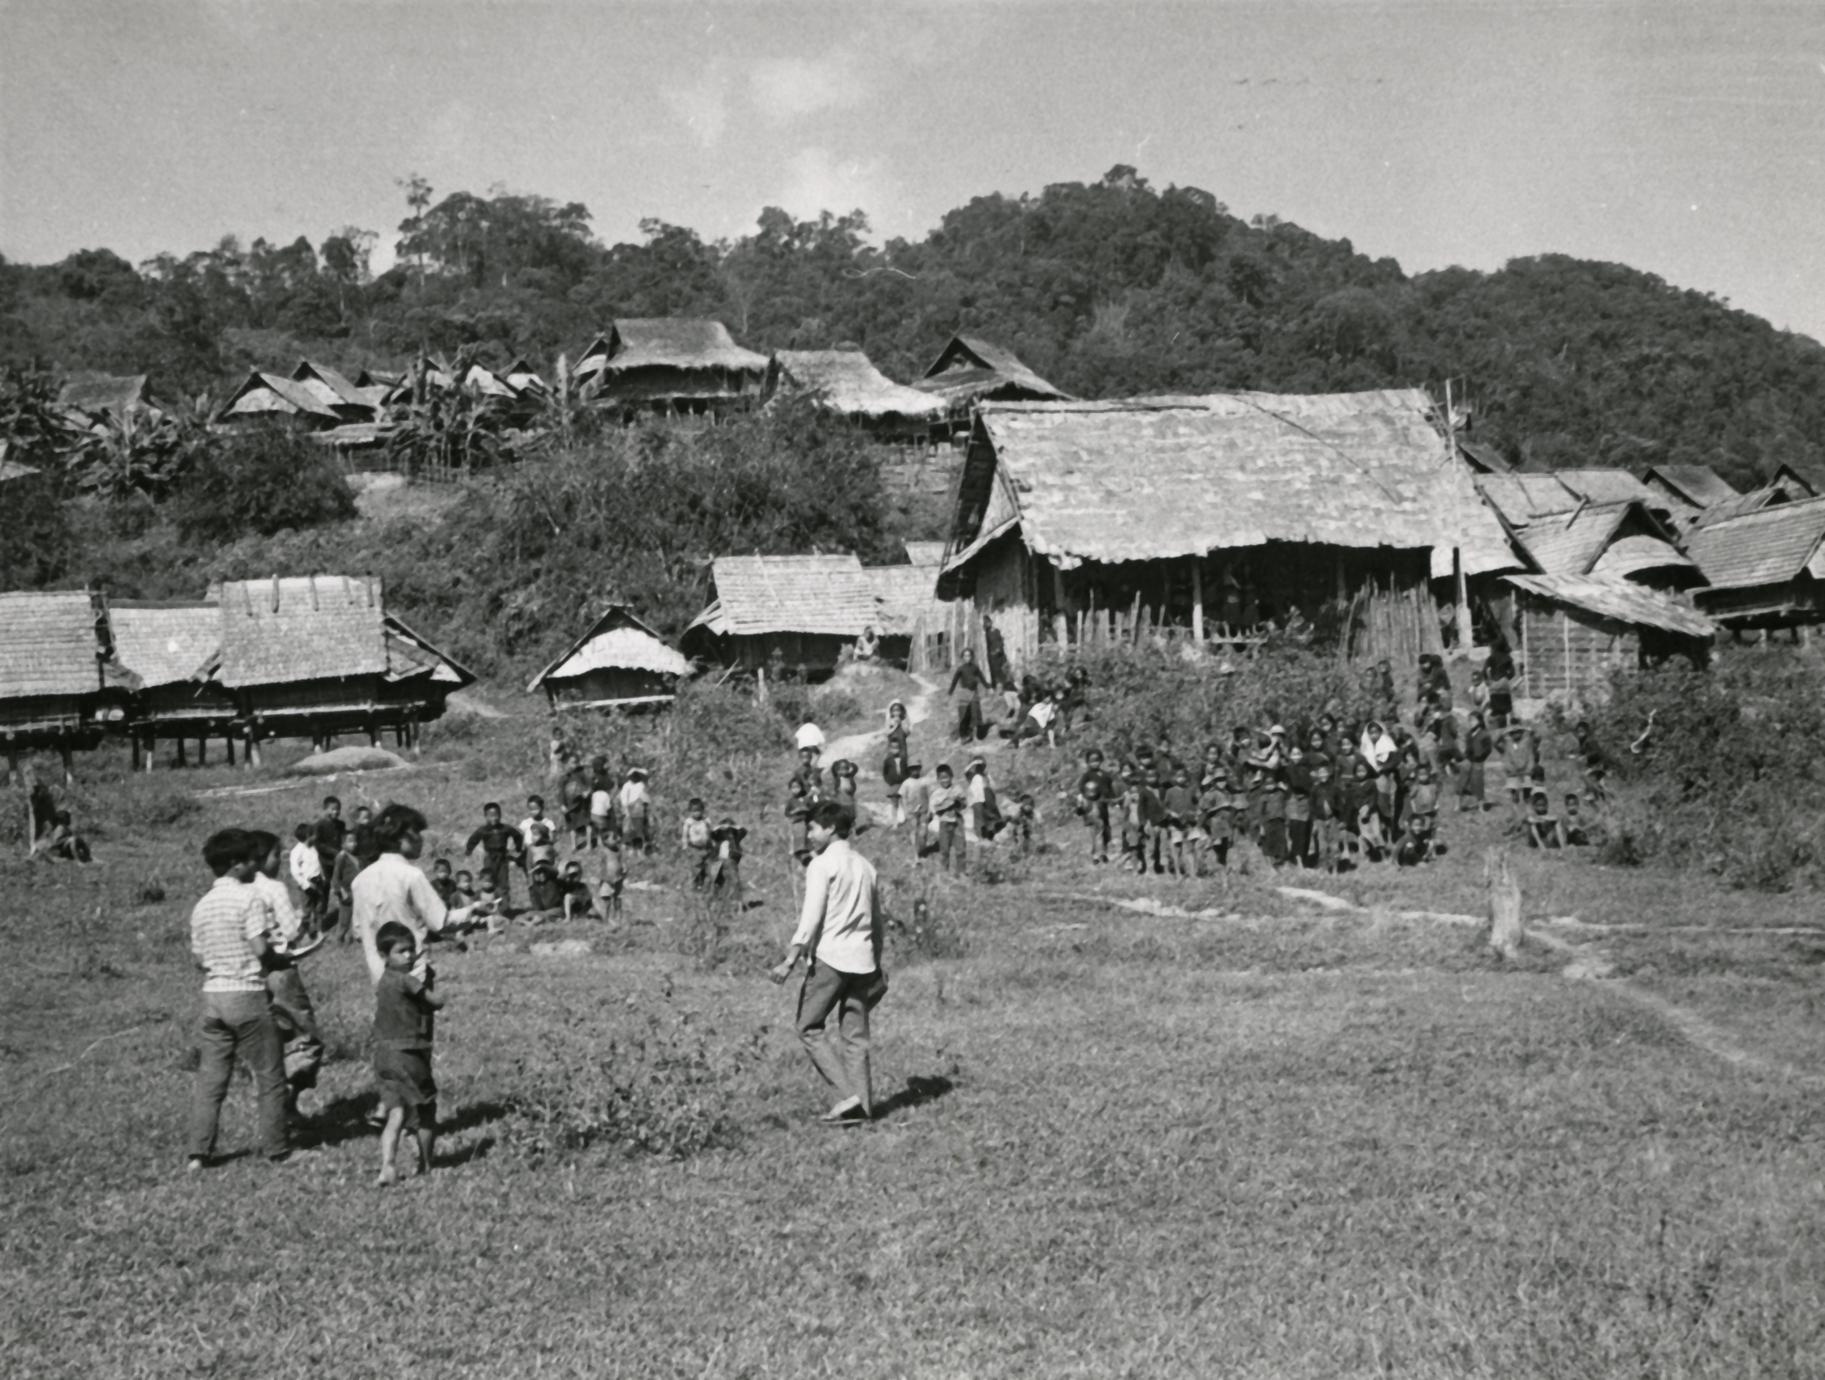 Adults and children in the Khmu' village of Pang Kwen in Houa Khong Province